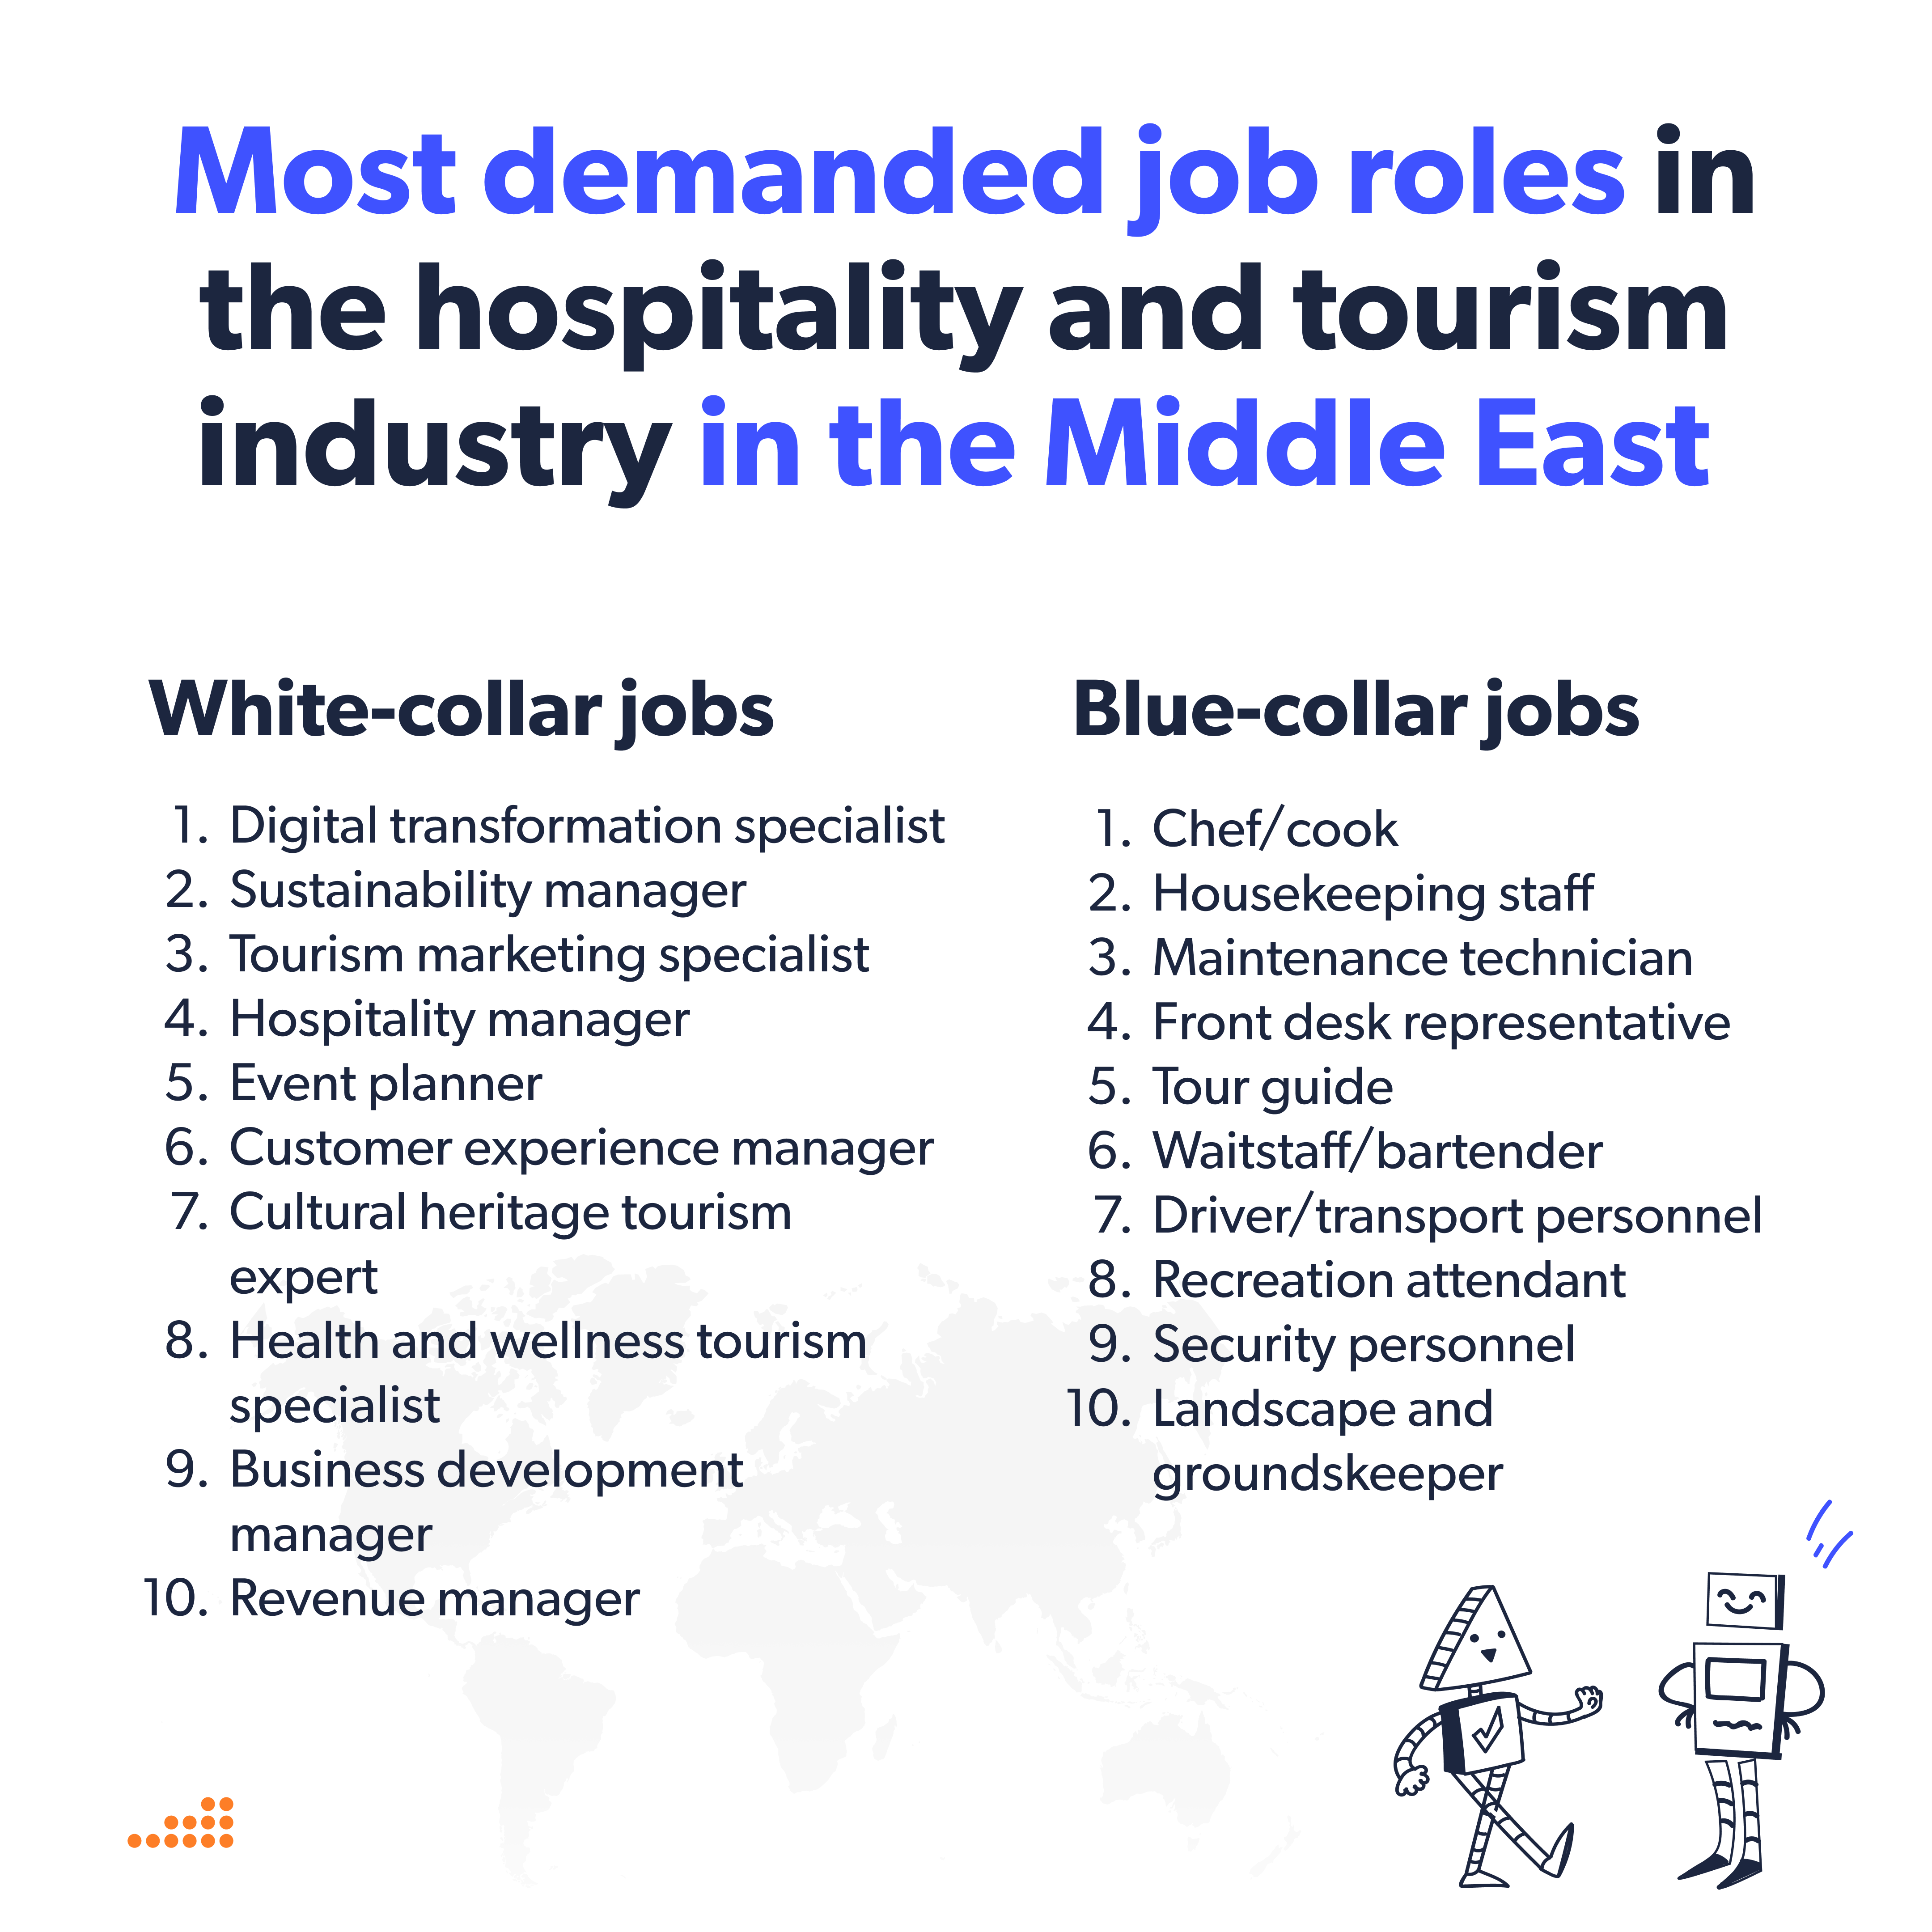 Most demanded job roles in the hospitality and tourism industry in the Middle East